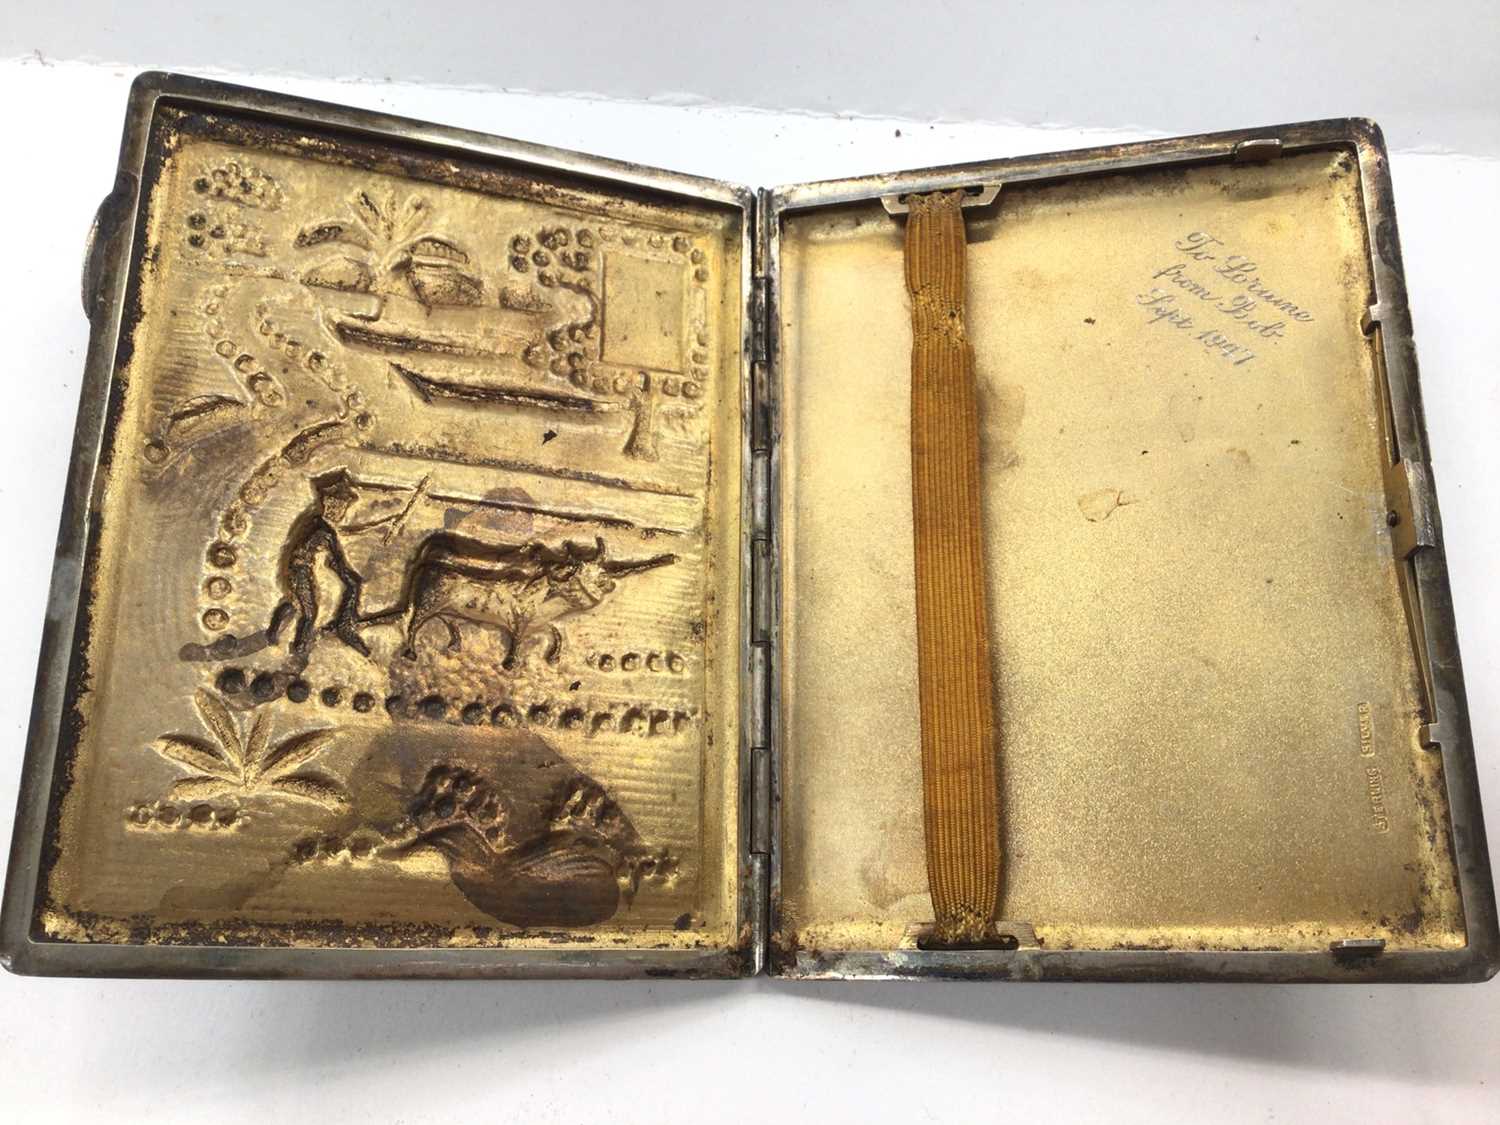 Burmese silver cigarette case with farming scene decoration, together with a pair of Chinese silver - Image 3 of 6